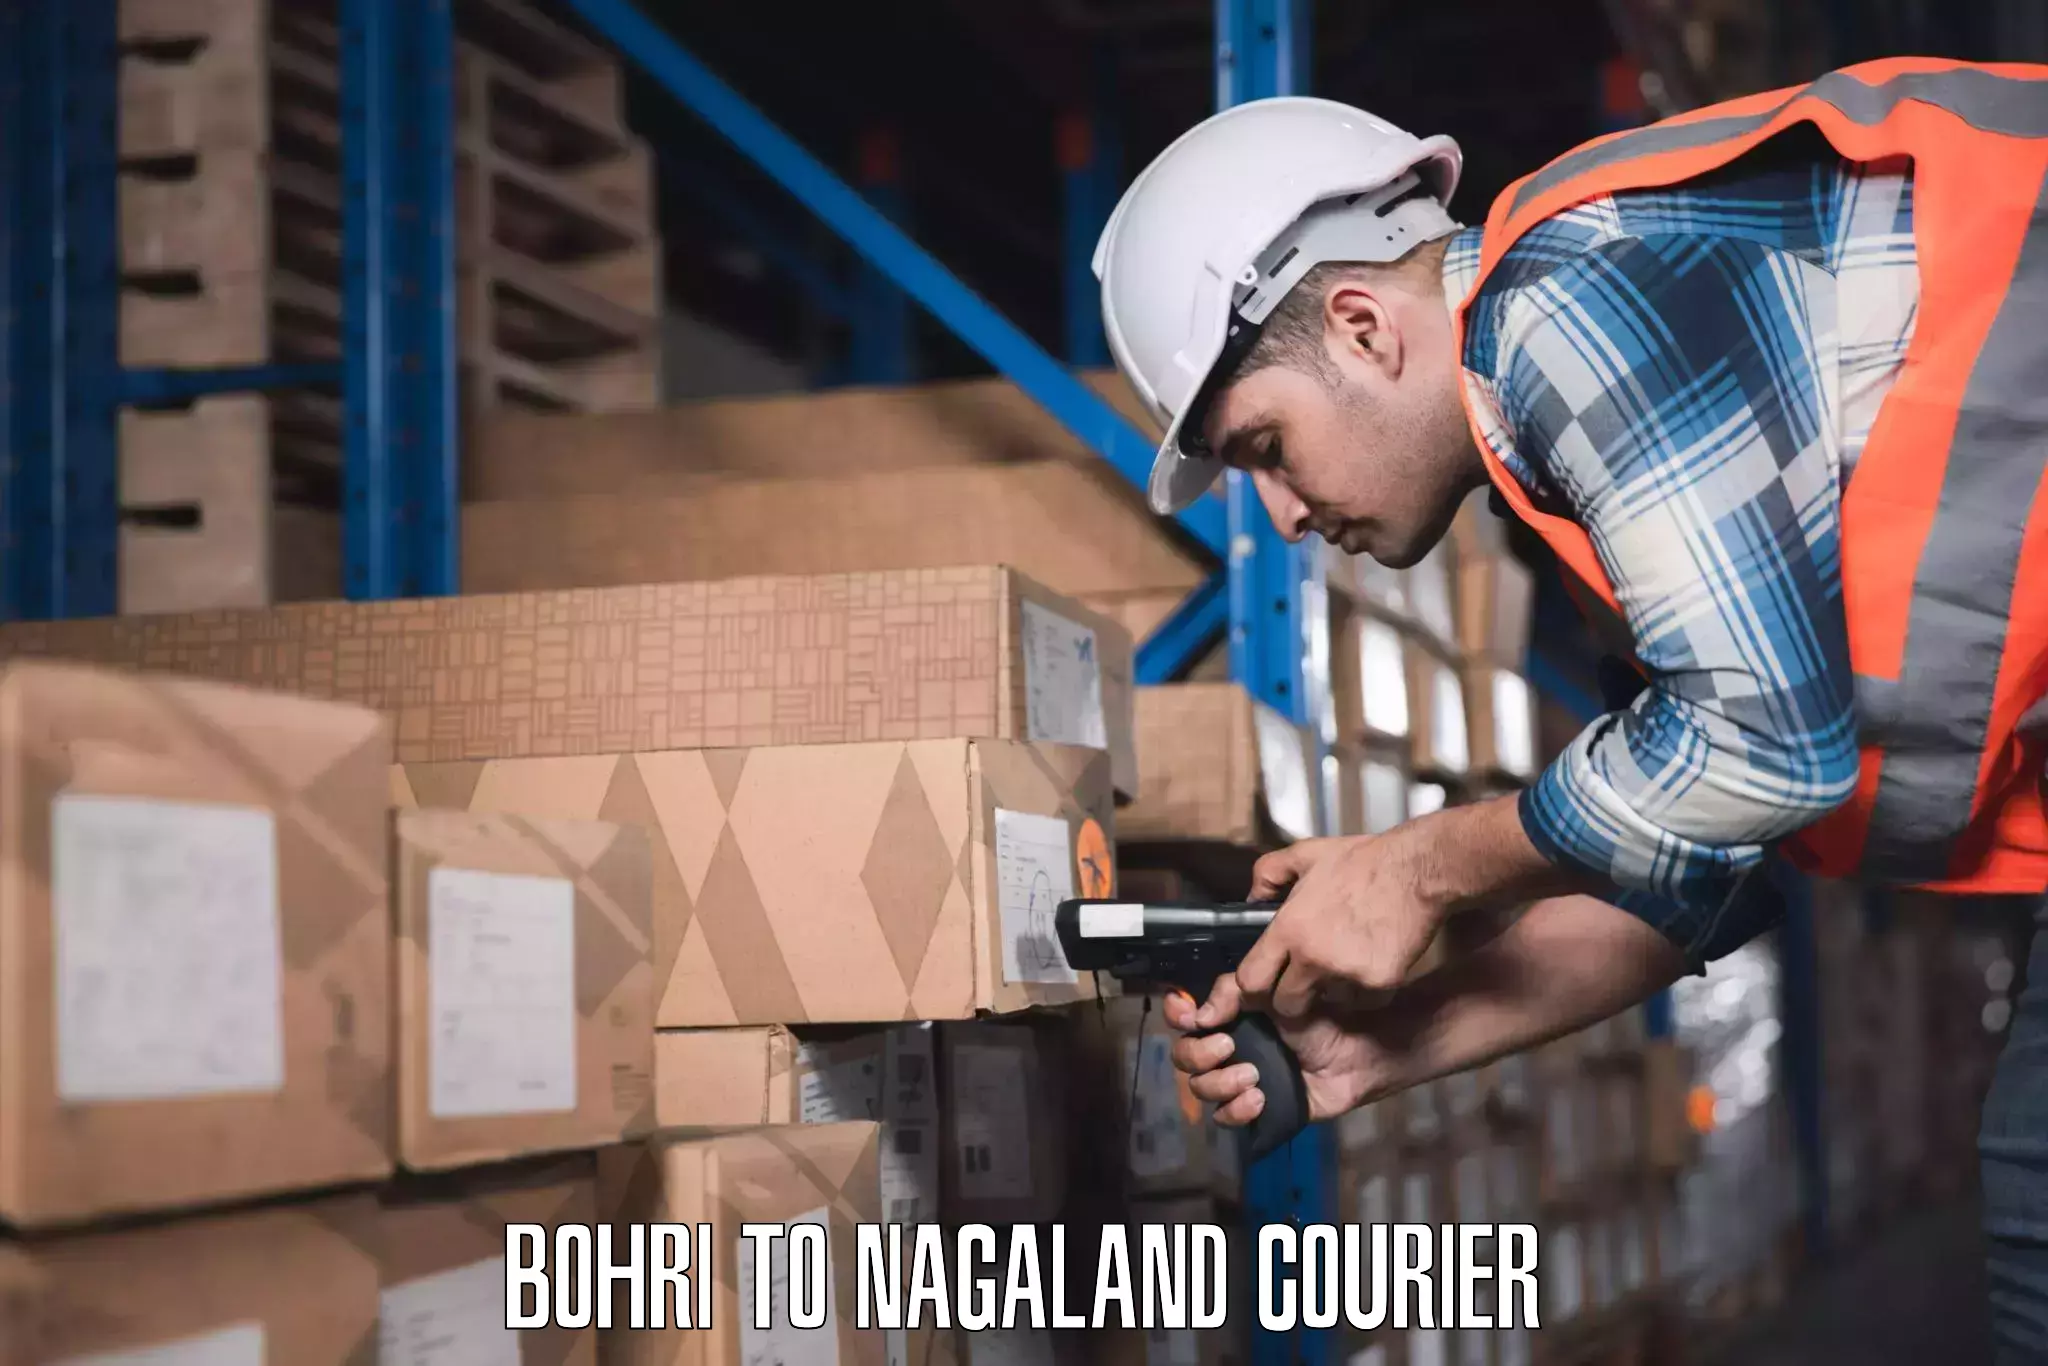 Luggage shipping specialists Bohri to Nagaland